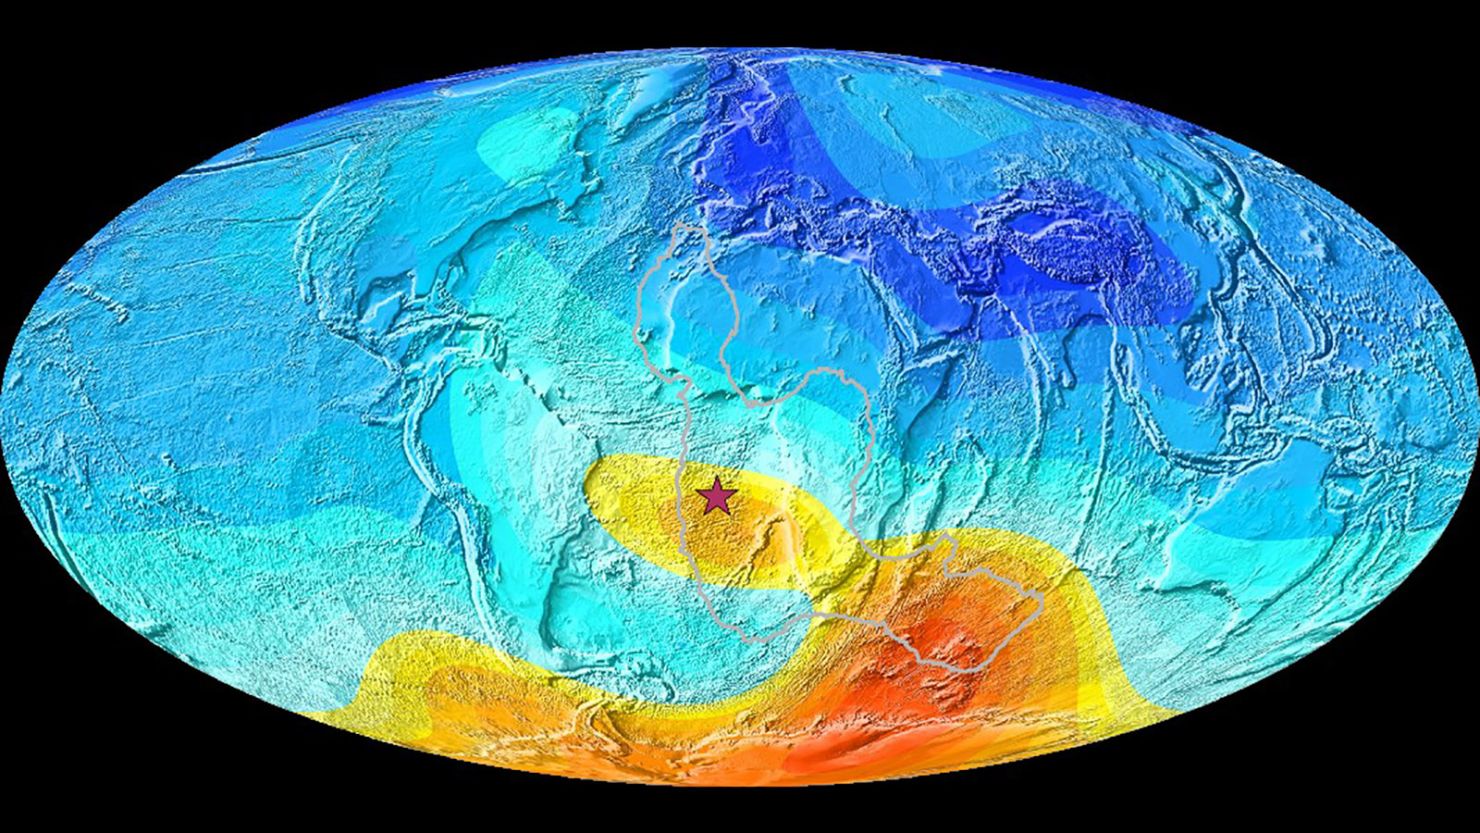 A map of the Earth showing the present-day deviation from expected magnetic field direction. Strong deviations are in yellow-orange, and little deviations are in blue. The star is Saint Helena, which is right in the anomaly. The gray line shows the outline of the seismic area that is warmer than the rest of the mantle.